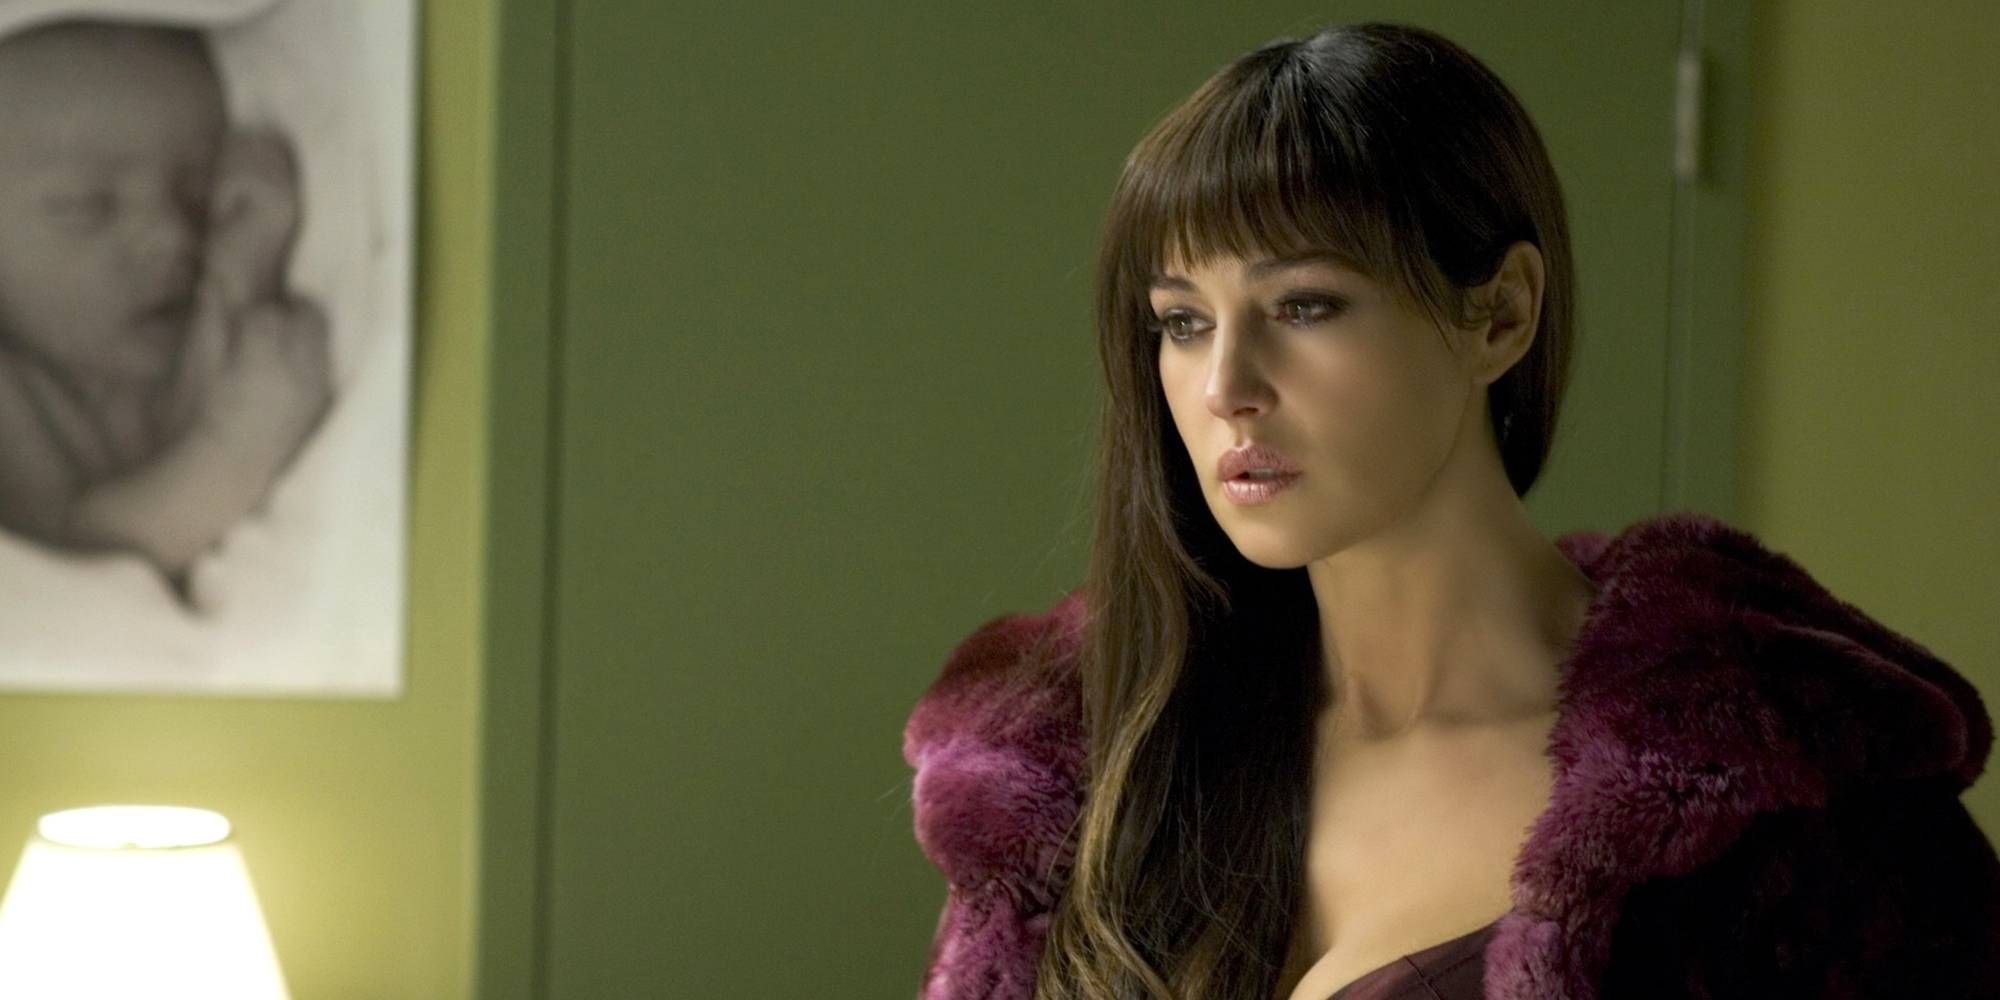 Monica Bellucci as Donna Quintano in Shoot 'Em Up looking worried.